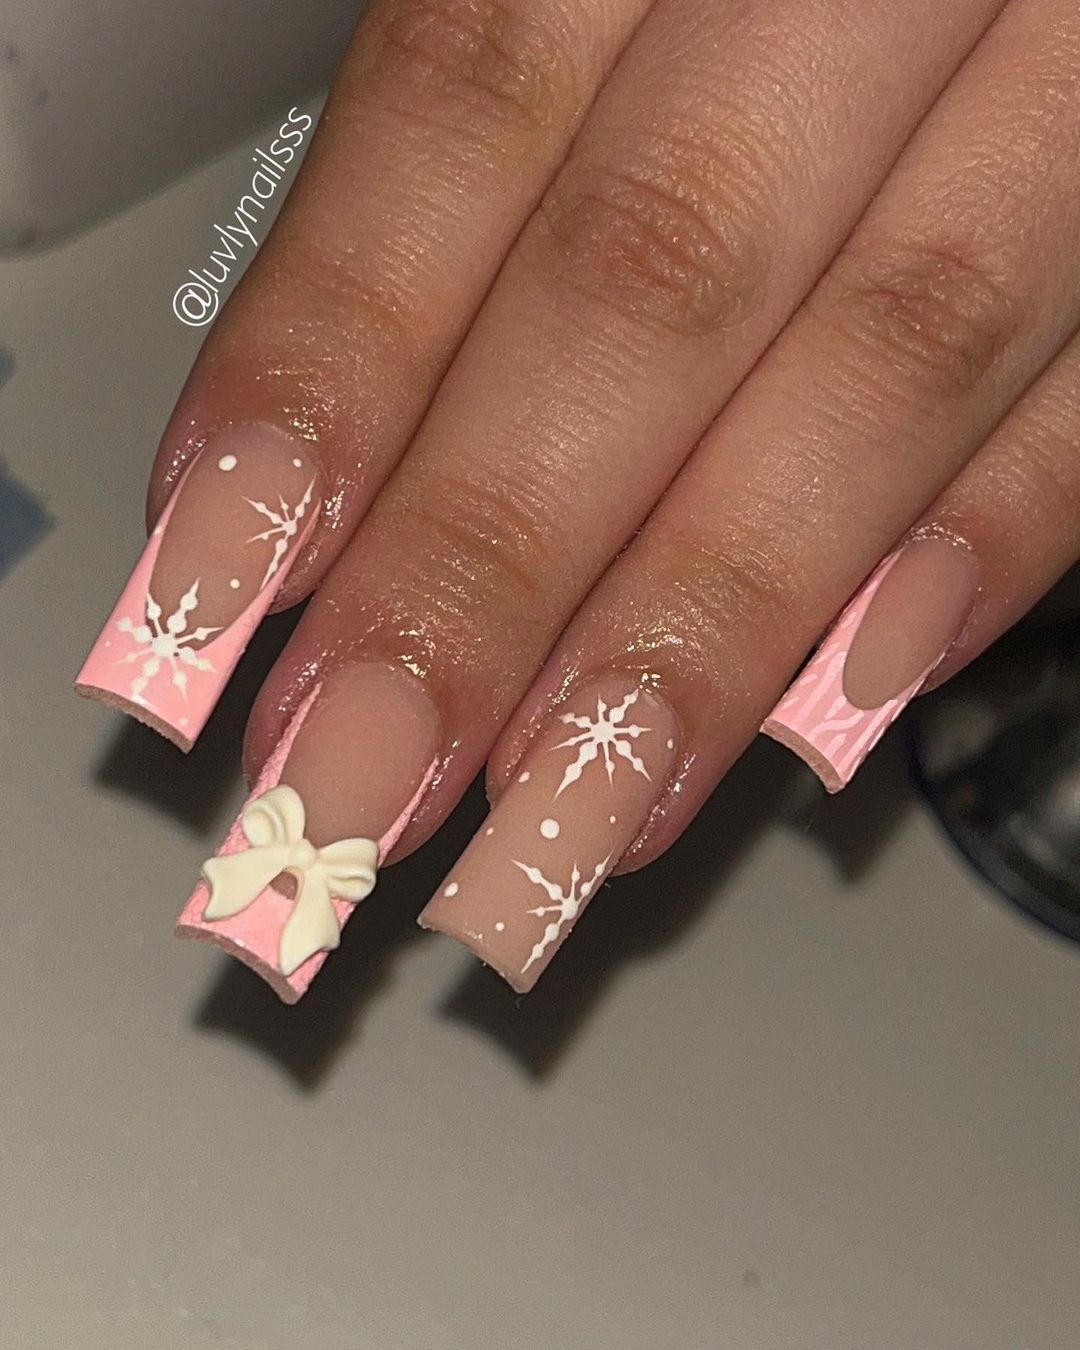 Light Pink French Tip Coffin Nails